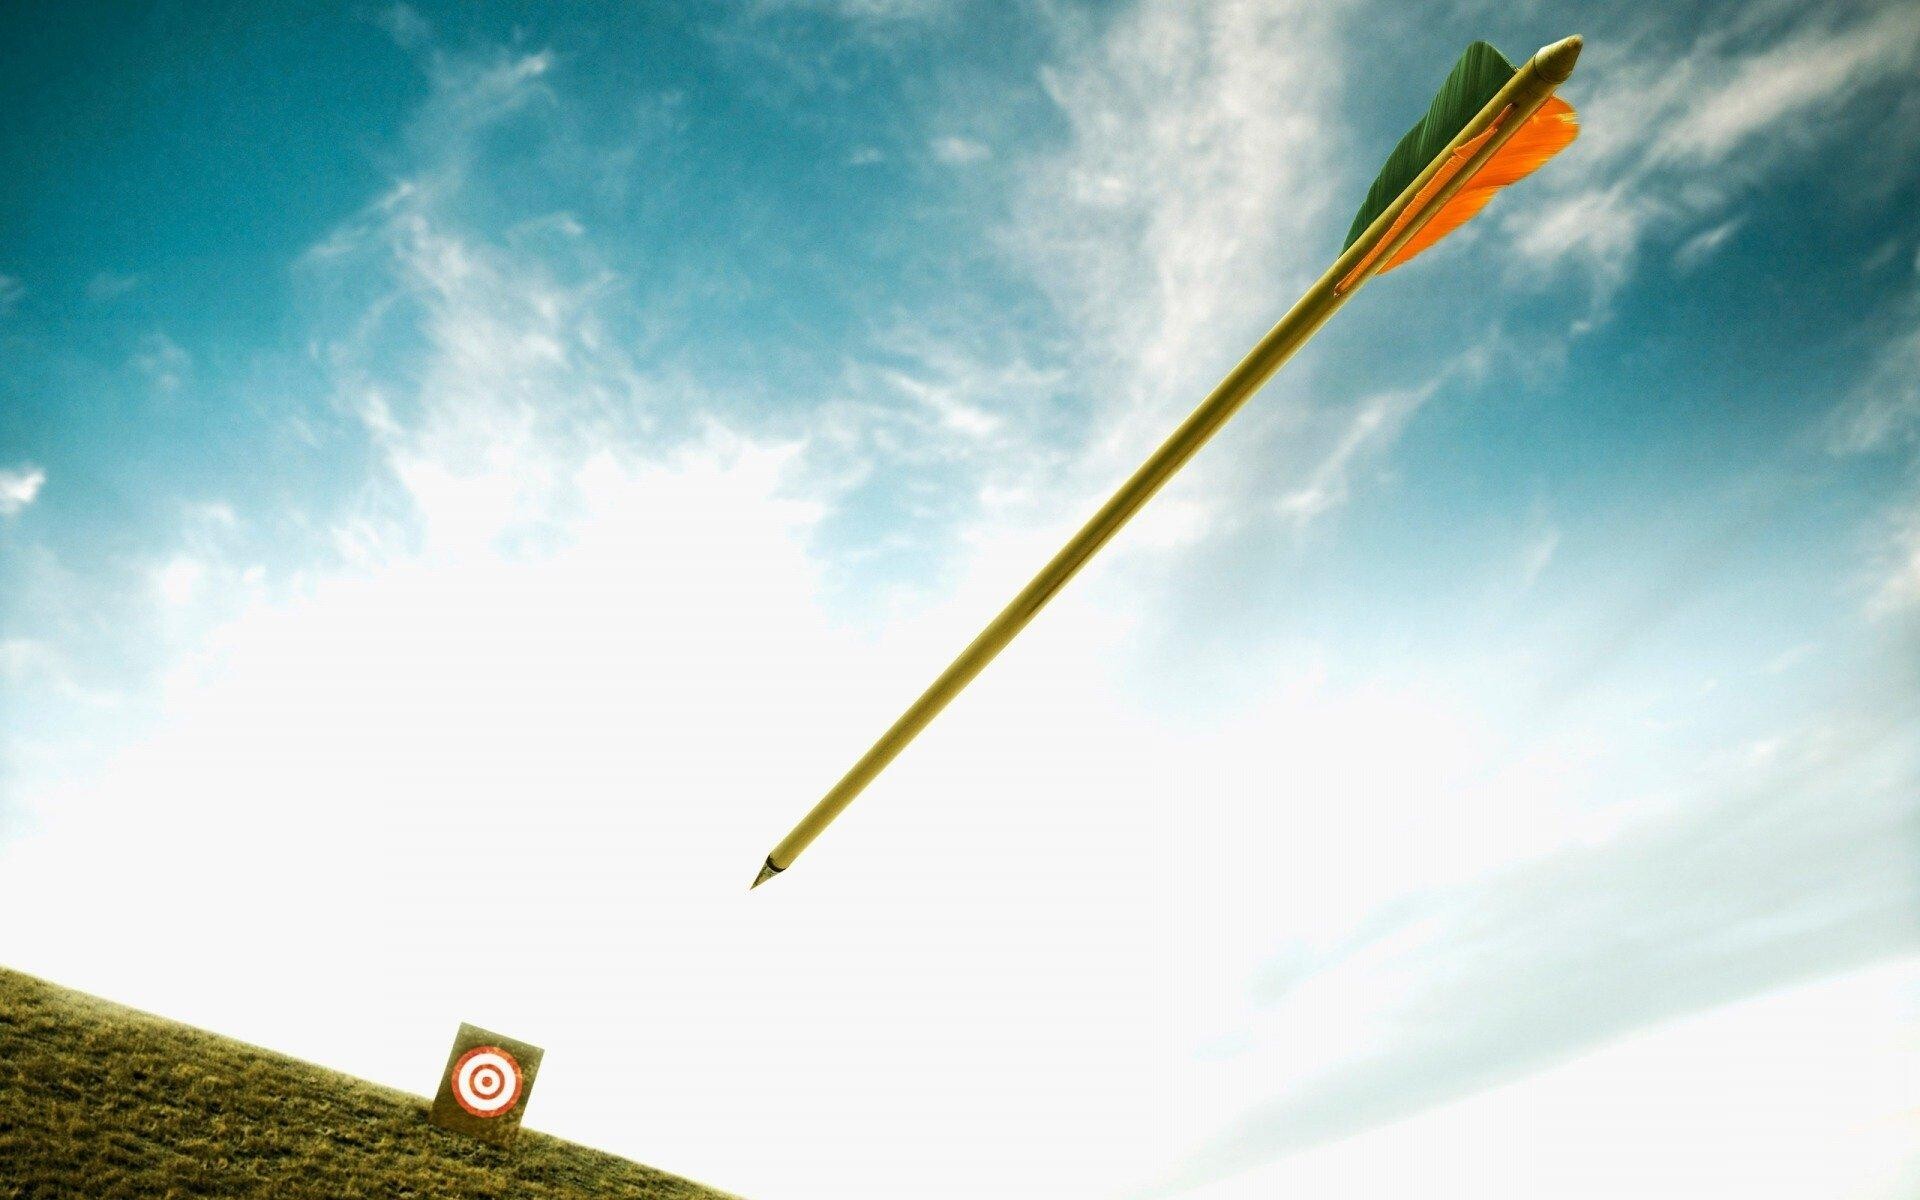 Goal (Aim): Stationary circular target, Archery, Flying arrow, Clouds, Outdoors. 1920x1200 HD Background.